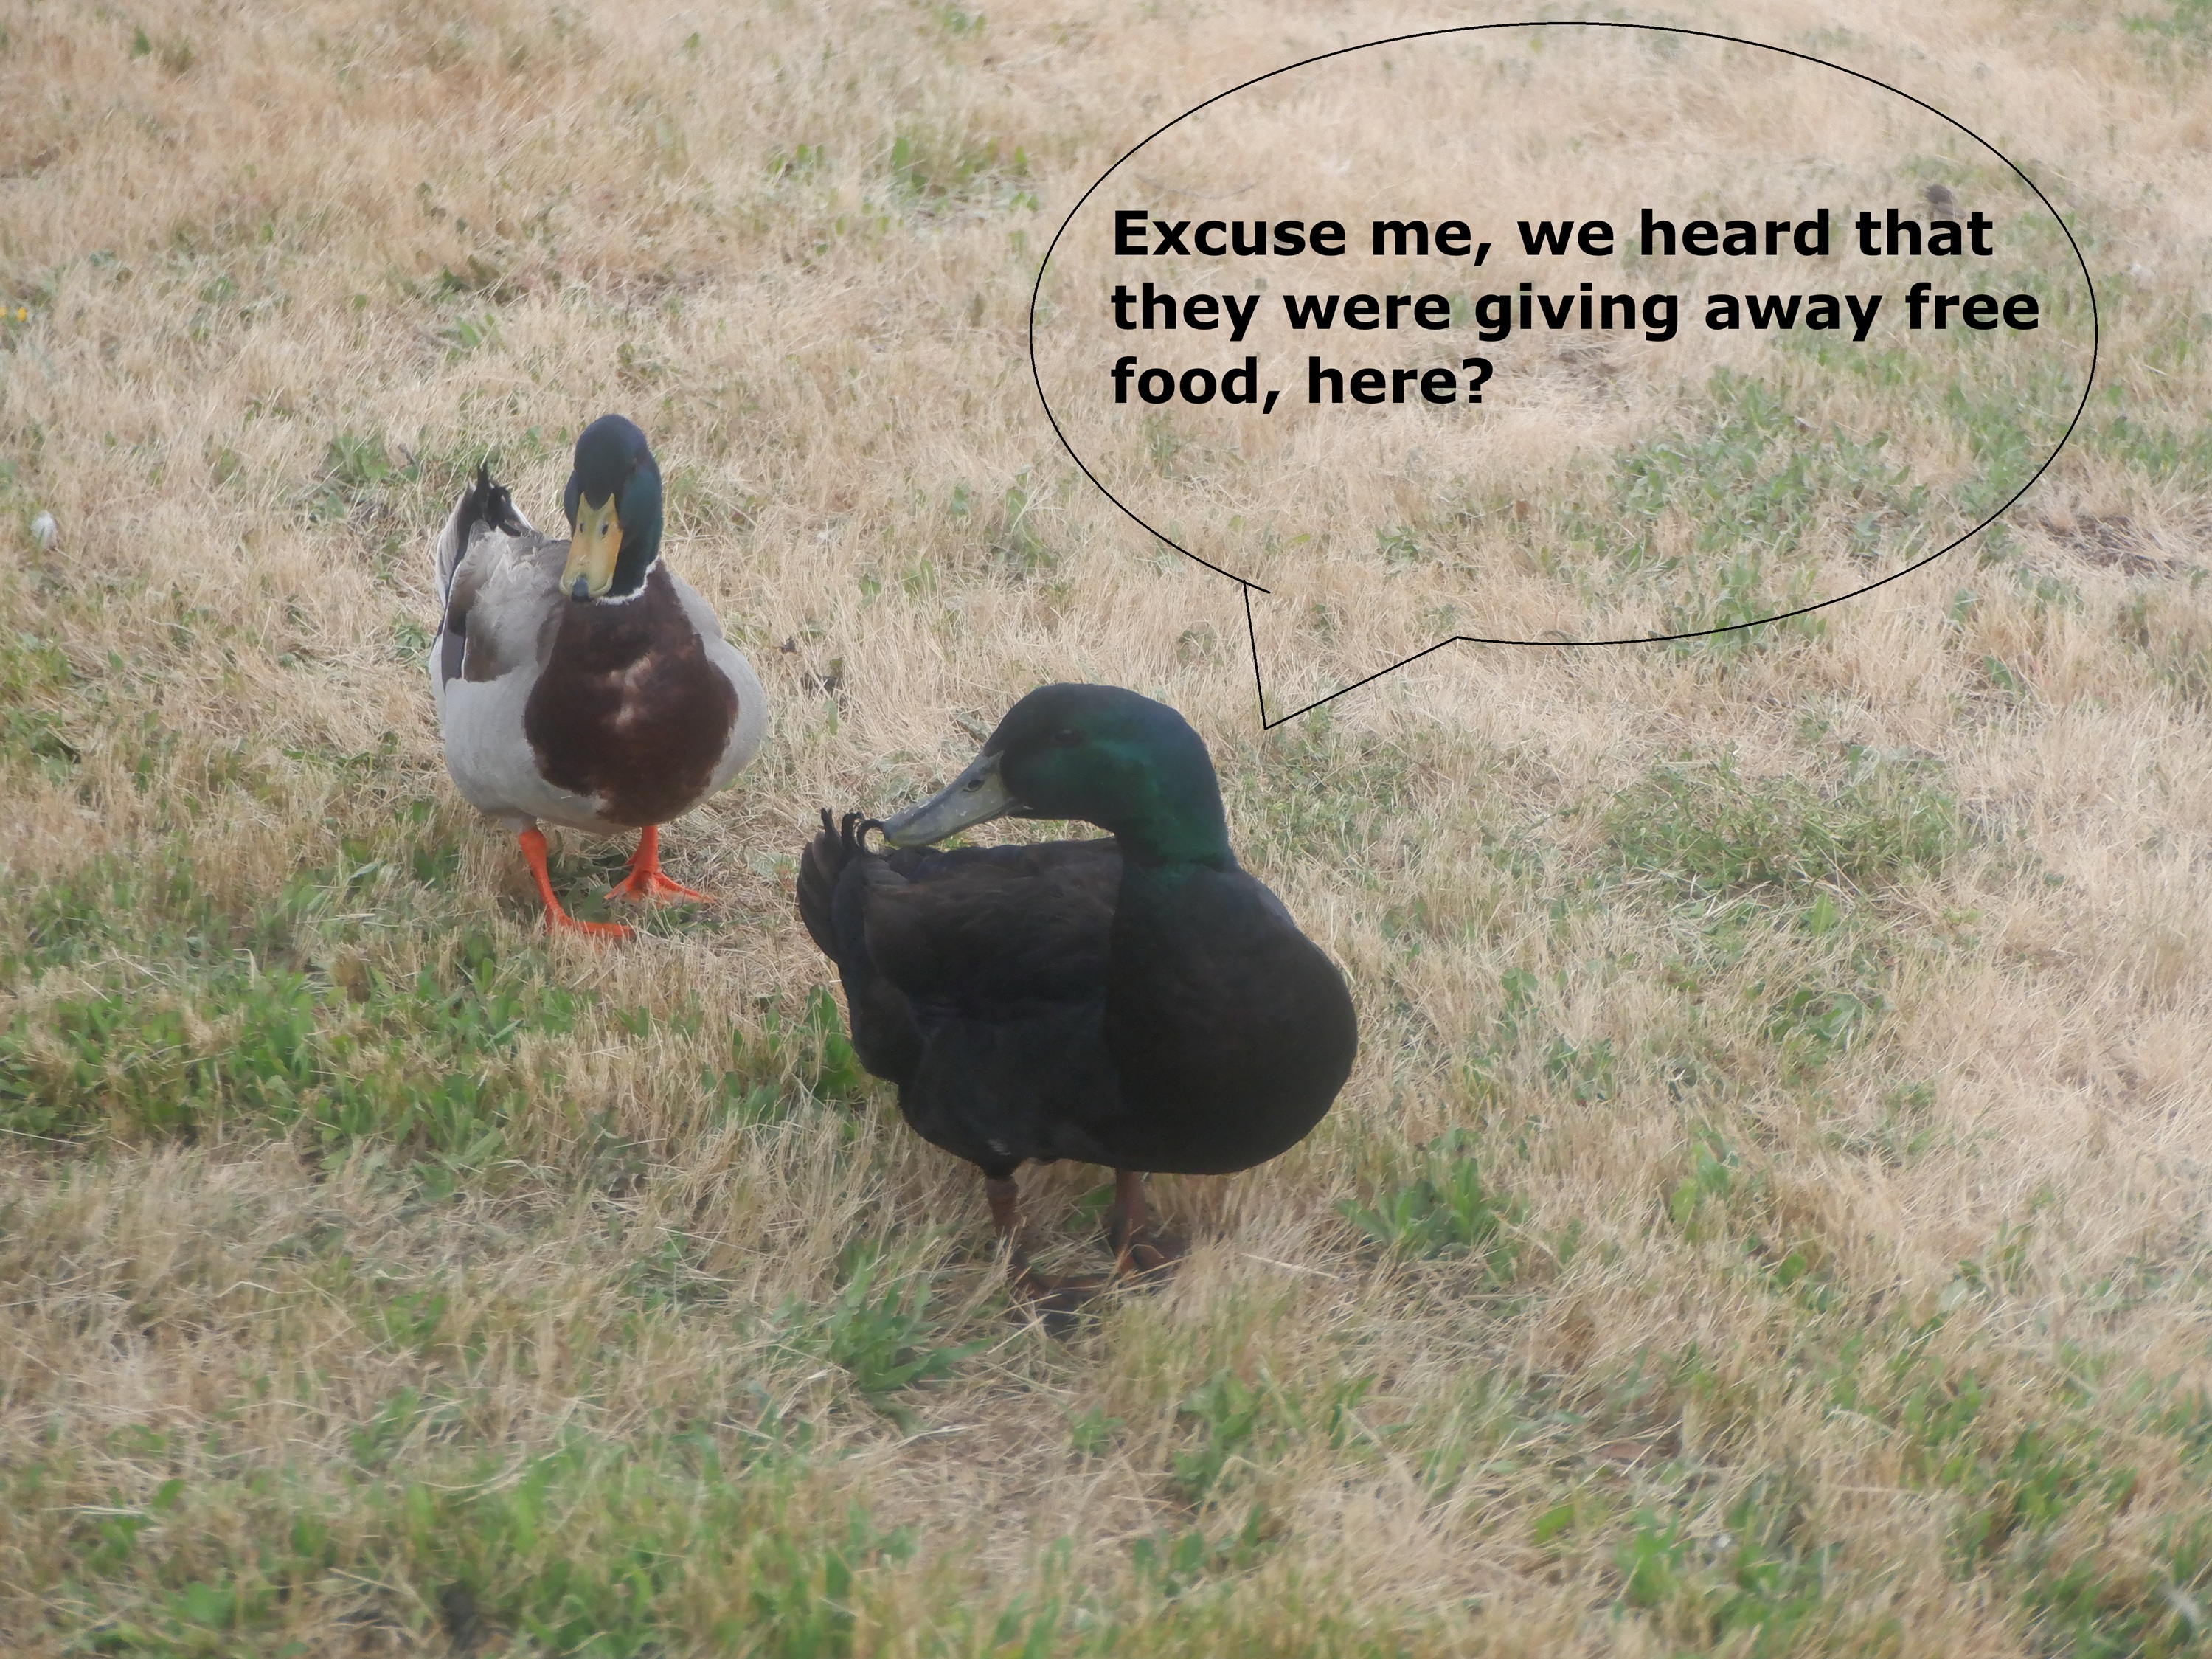 Photo I took of ducks at the park where the Food distribution is